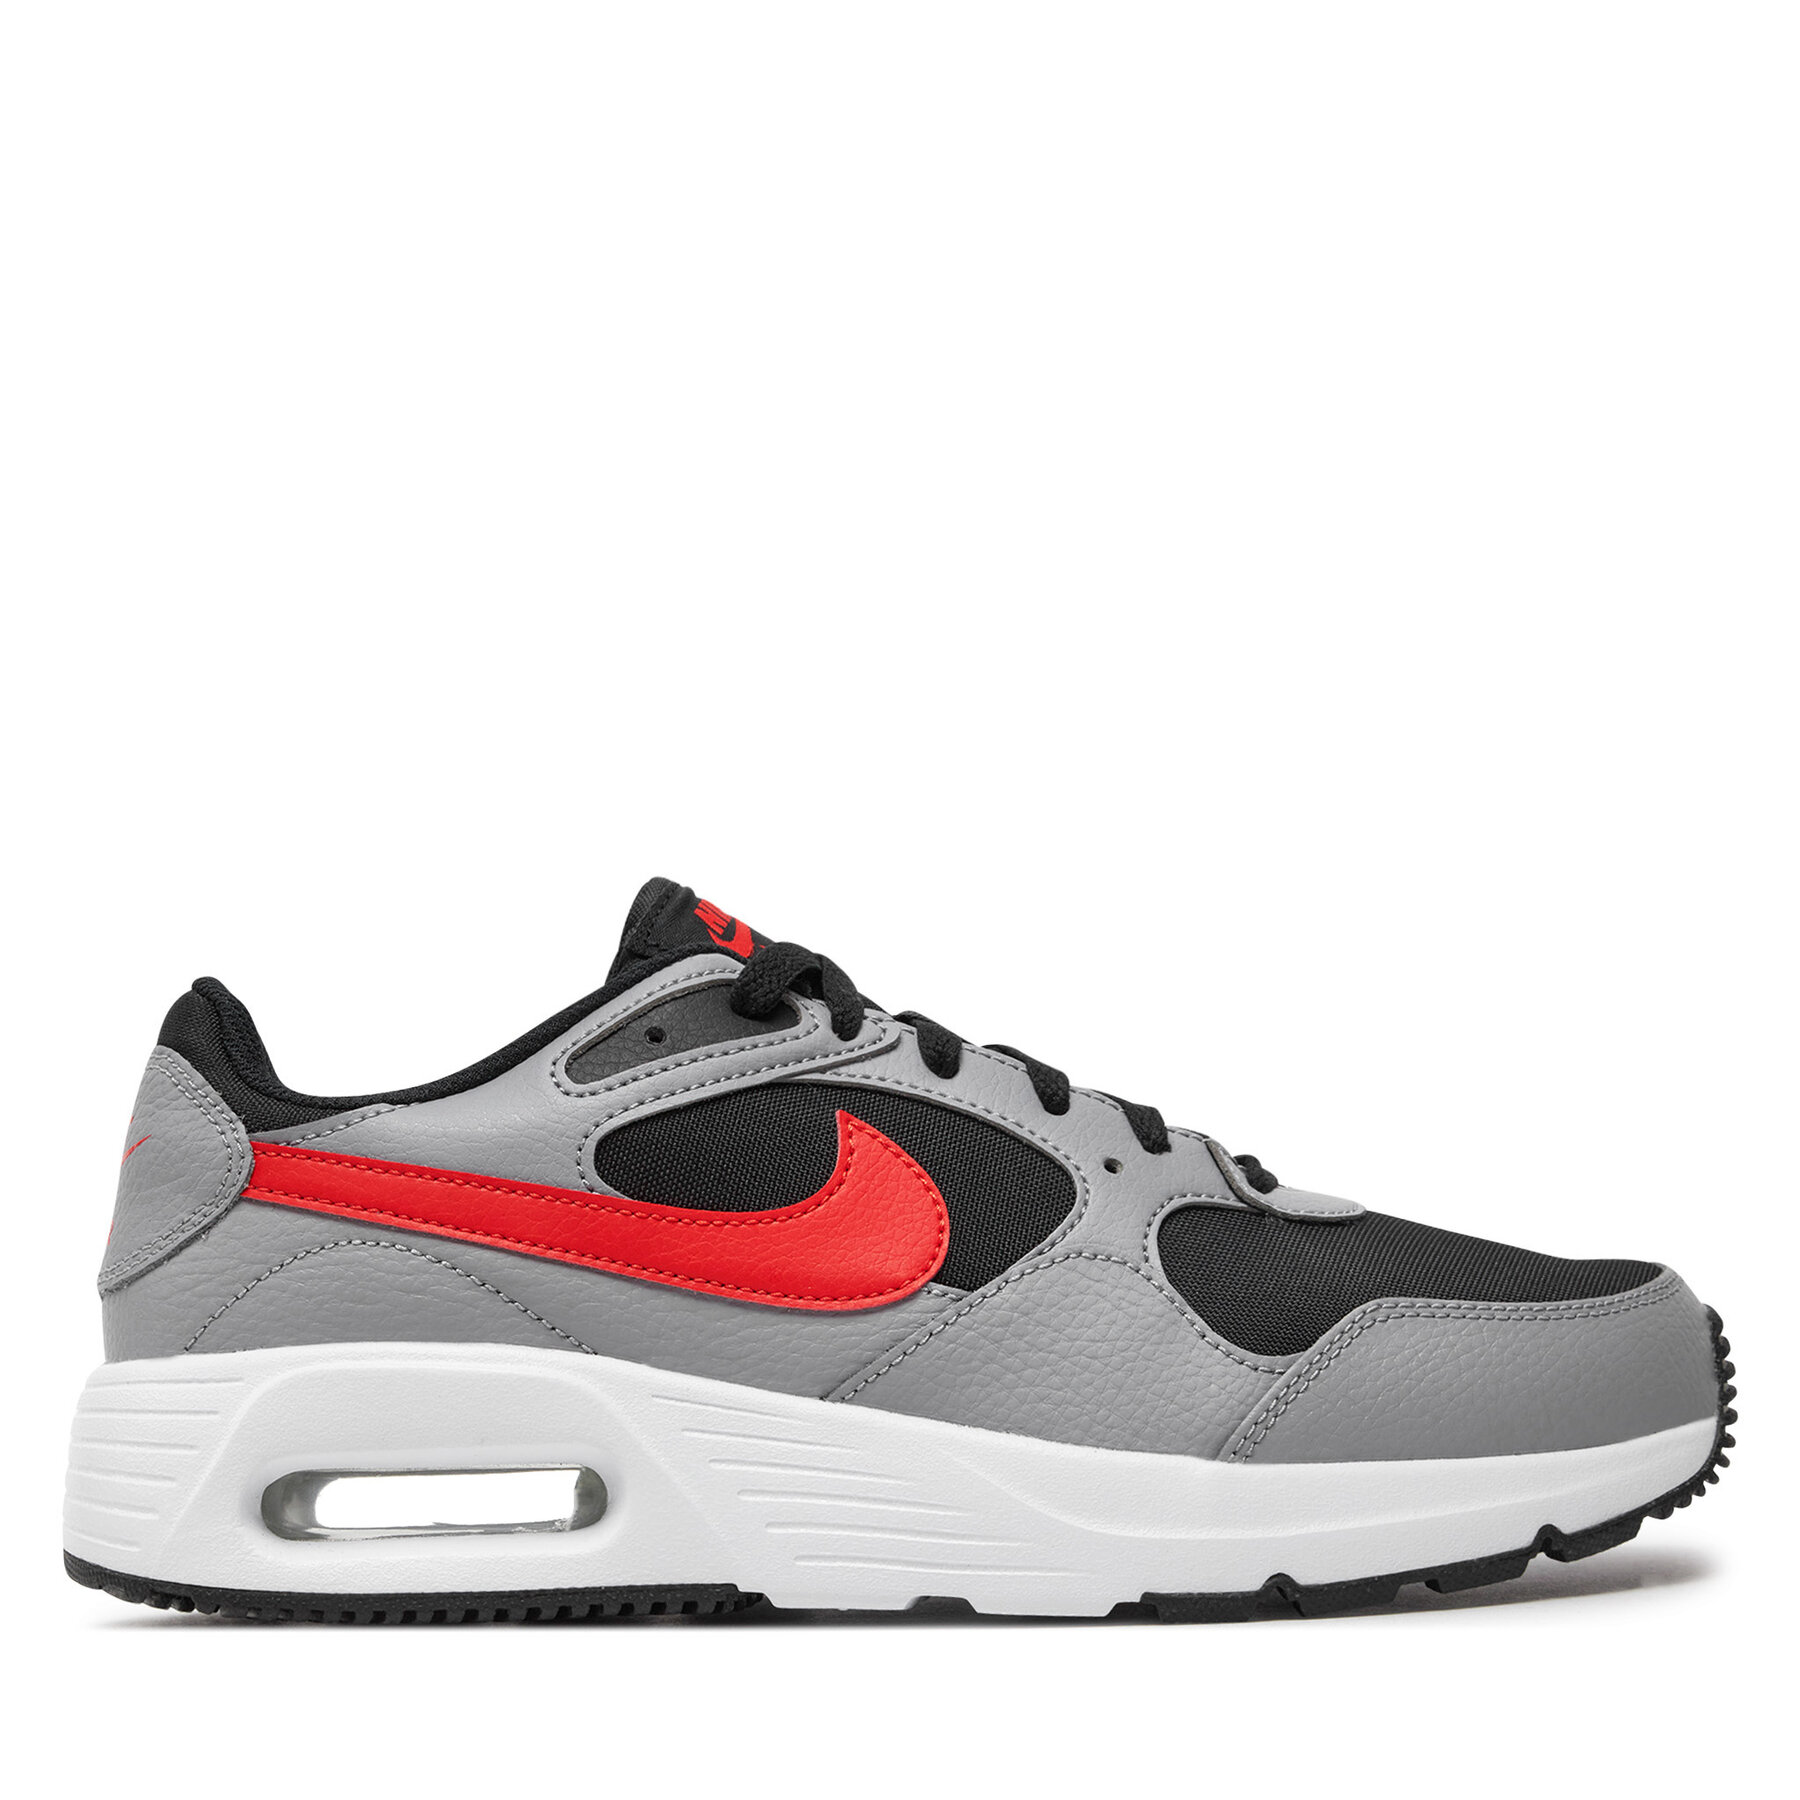 Nike Air Max SC black/picante red/cement grey